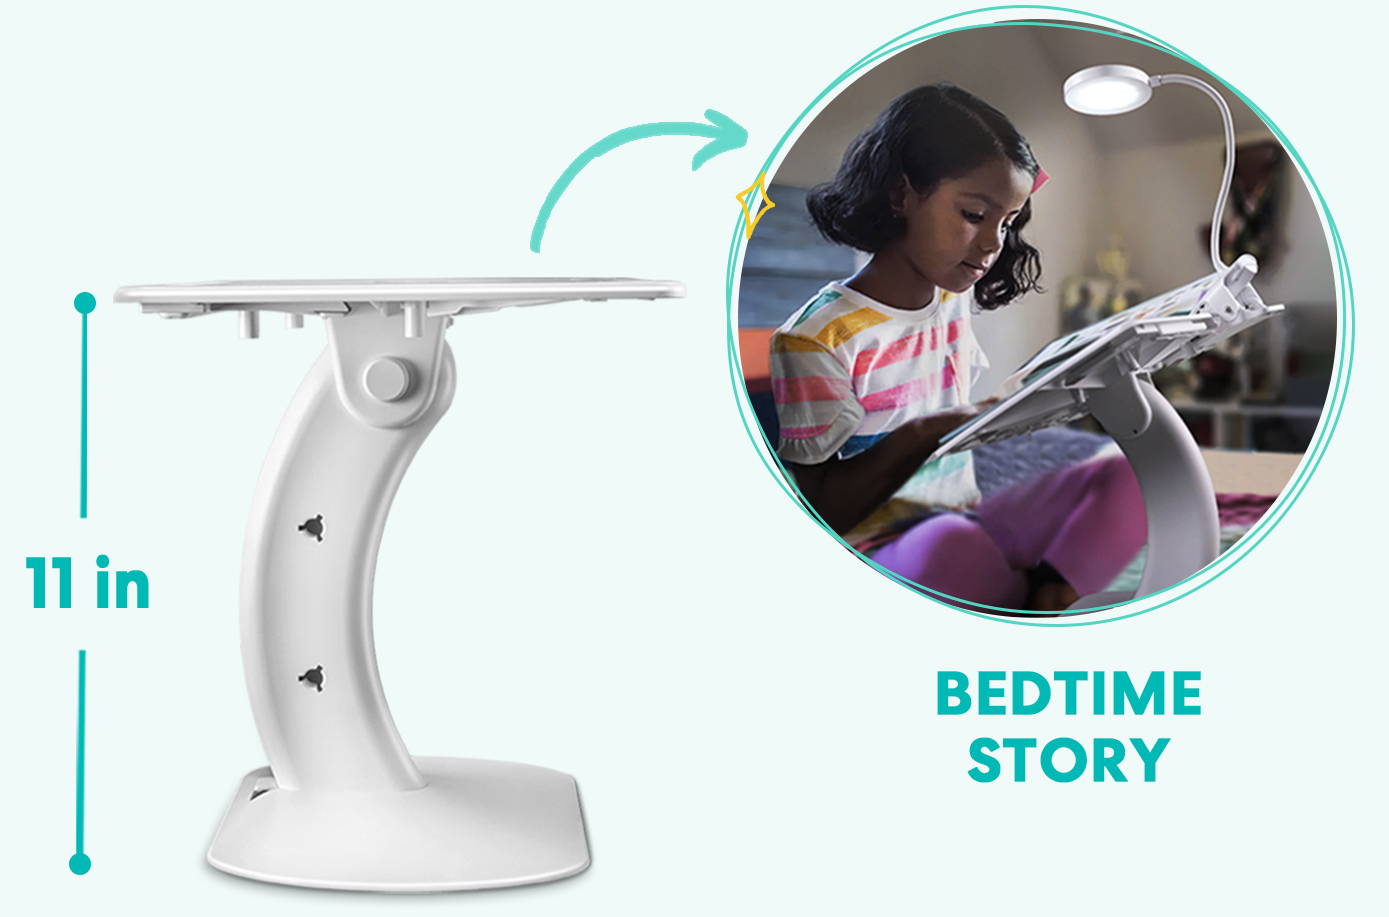 11 Lap Desks For Kids And Adults Who Want To Get Work Done